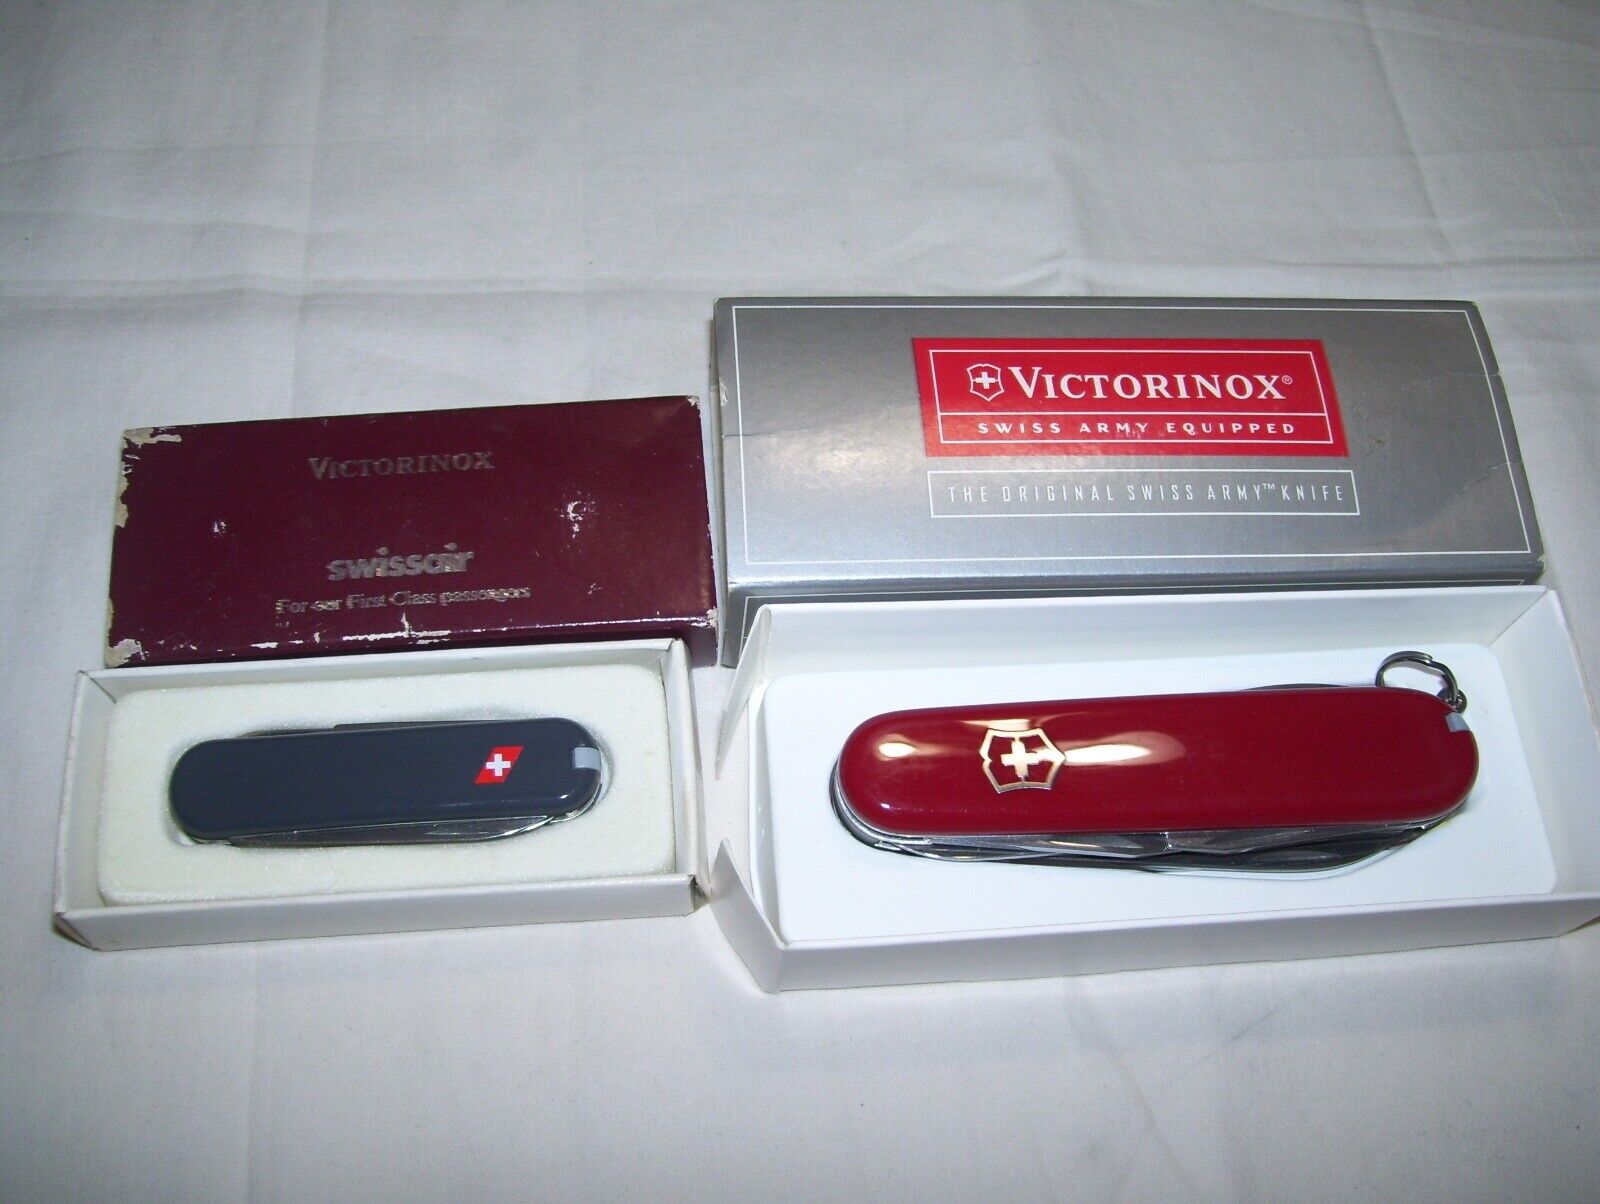 2 Old Vintage VICTORINOX Swiss Army Pocket Knifes Swissair Advertising with Box